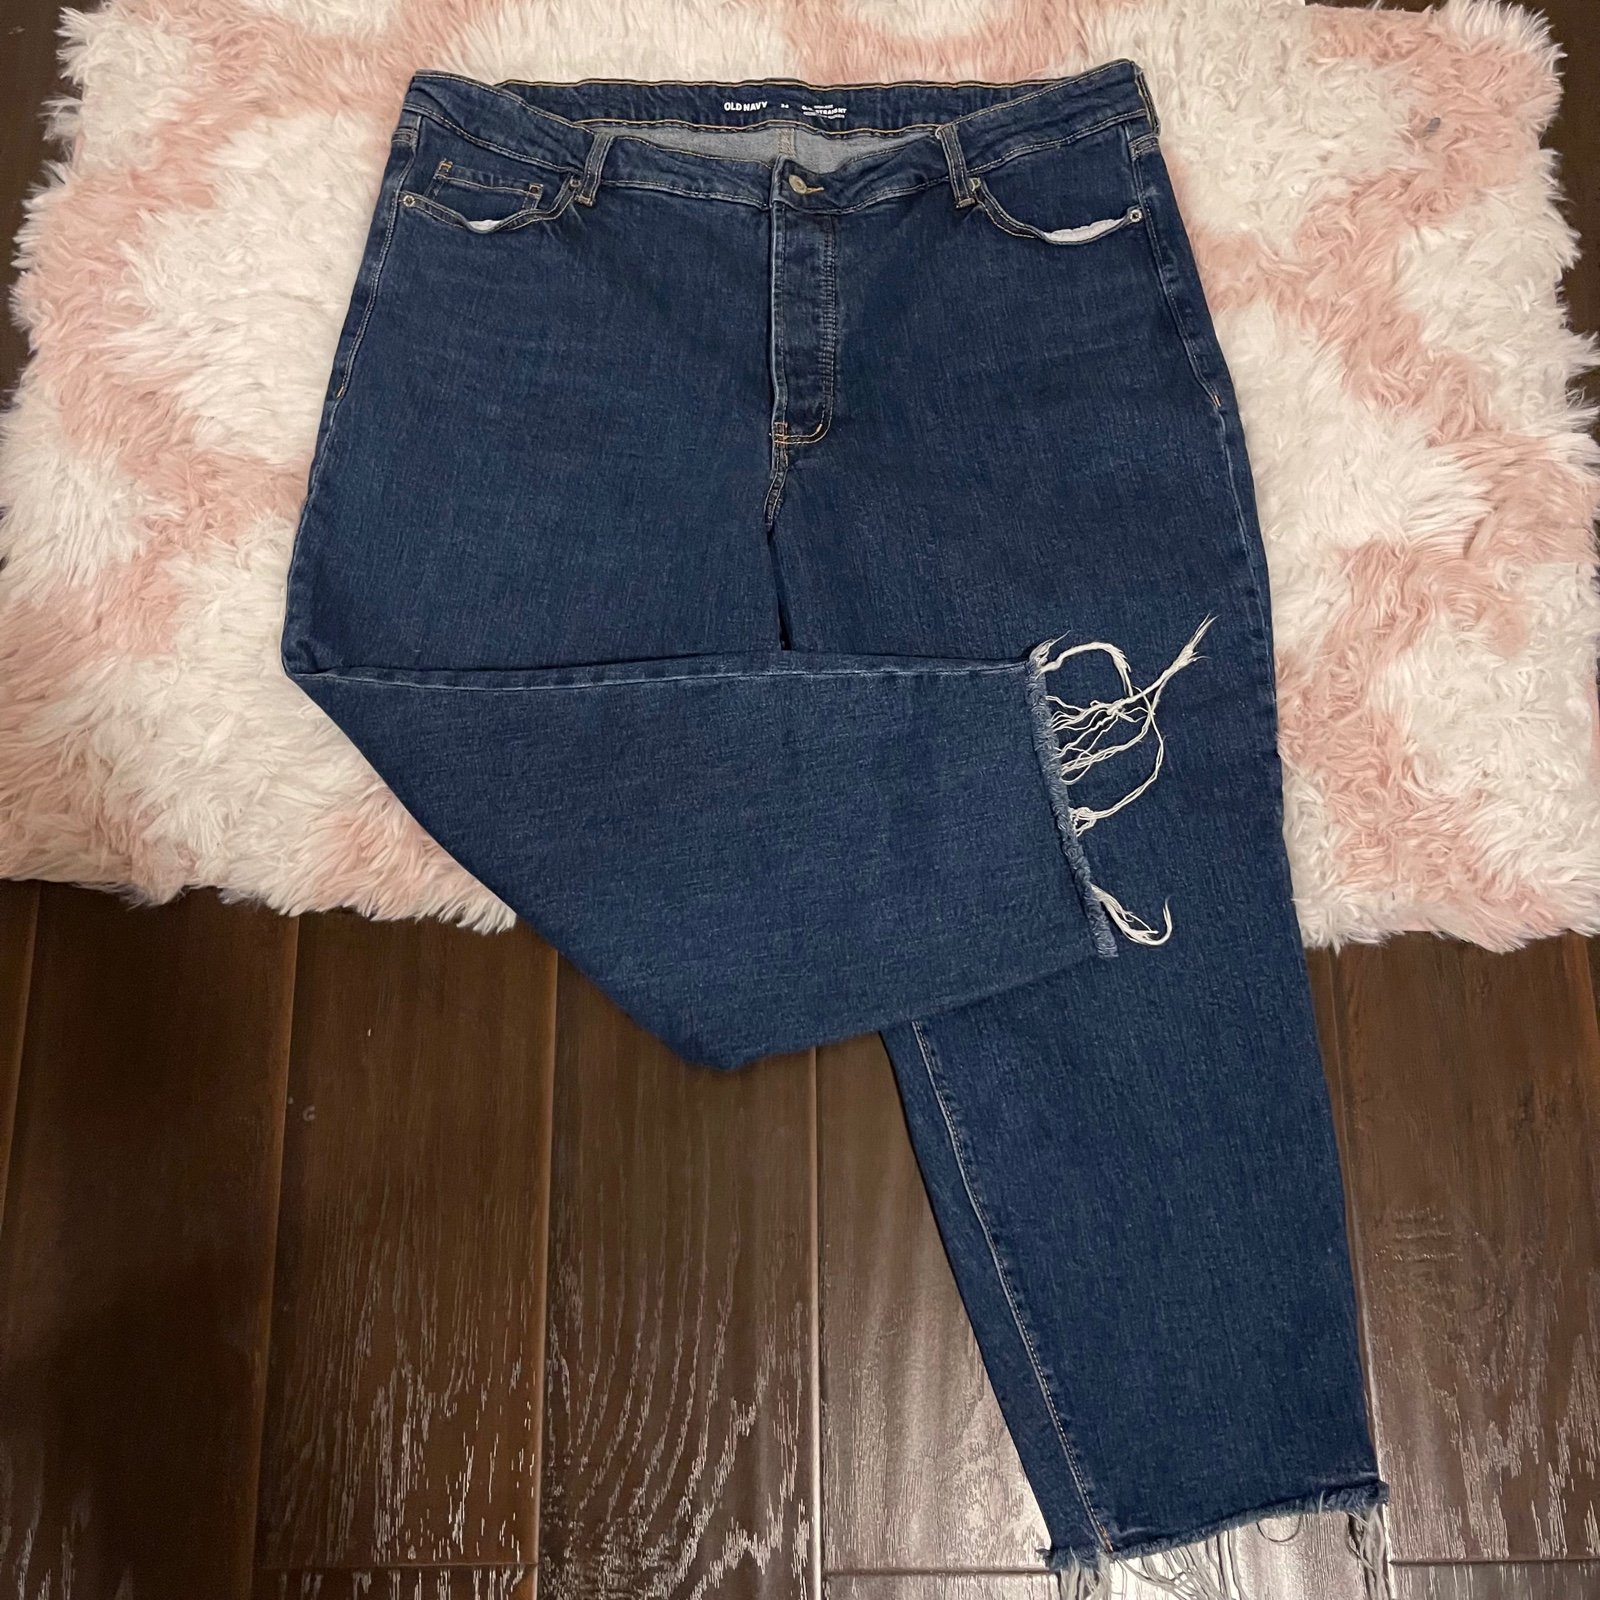 Buy Old Navy High Rise OG Straight Jeans Women´s Plus Size 24 pkGYA5Bkx just buy it